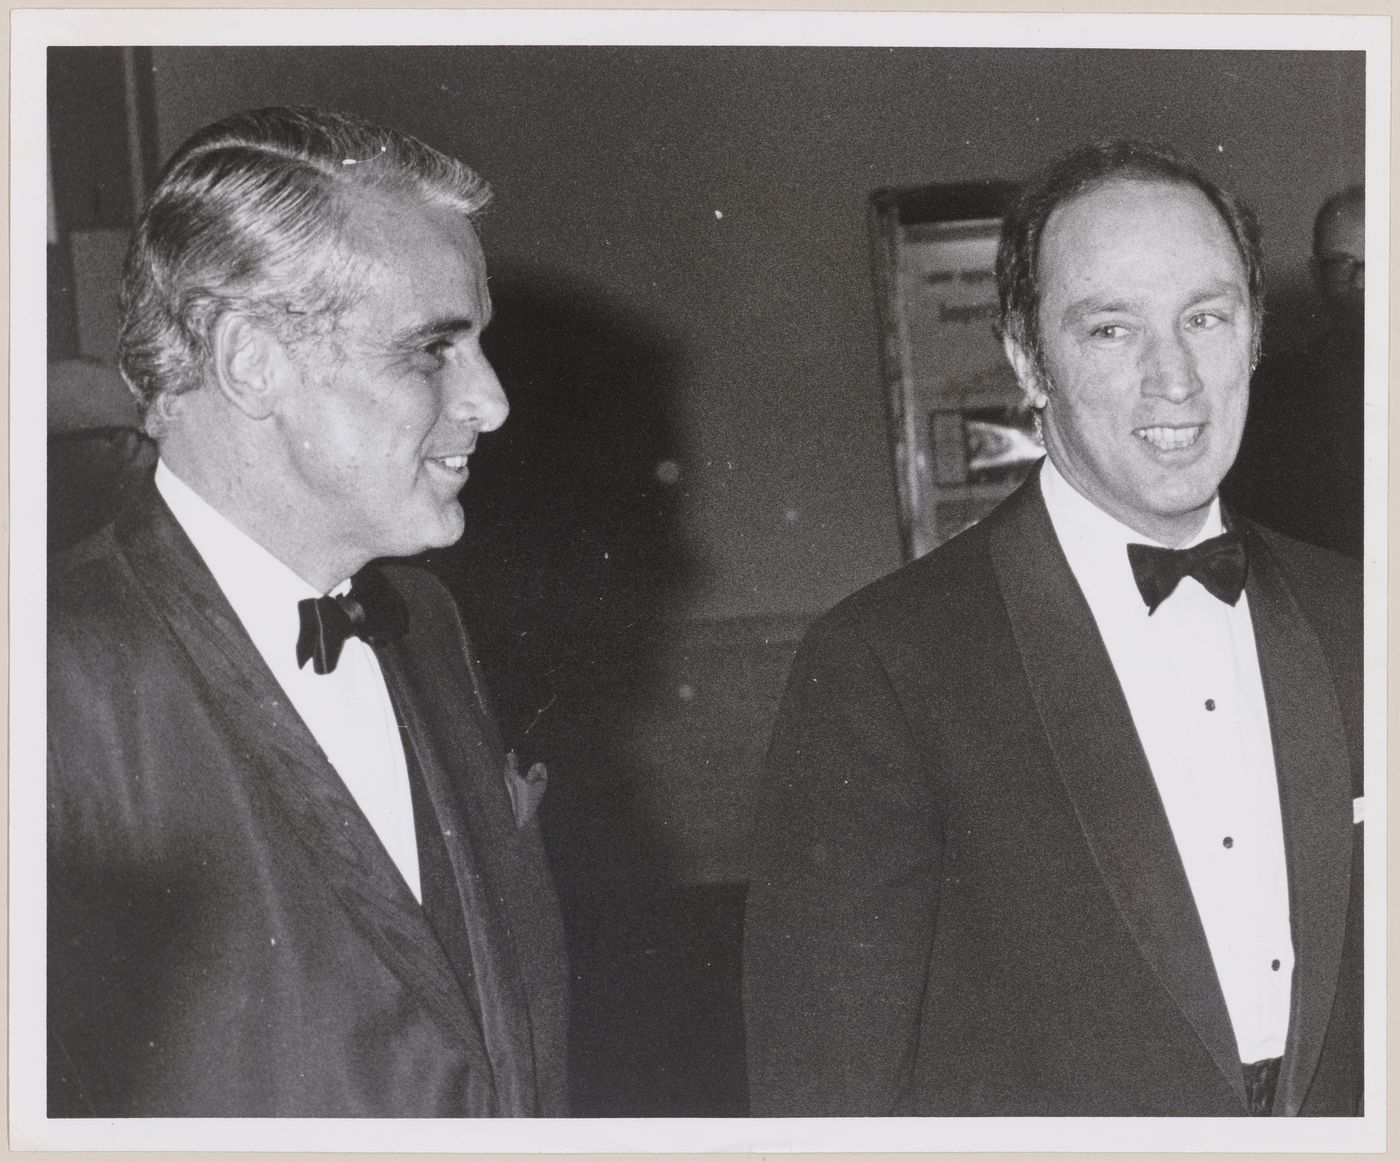 Parkin and Prime Minister Pierre Elliot Trudeau at dinner event